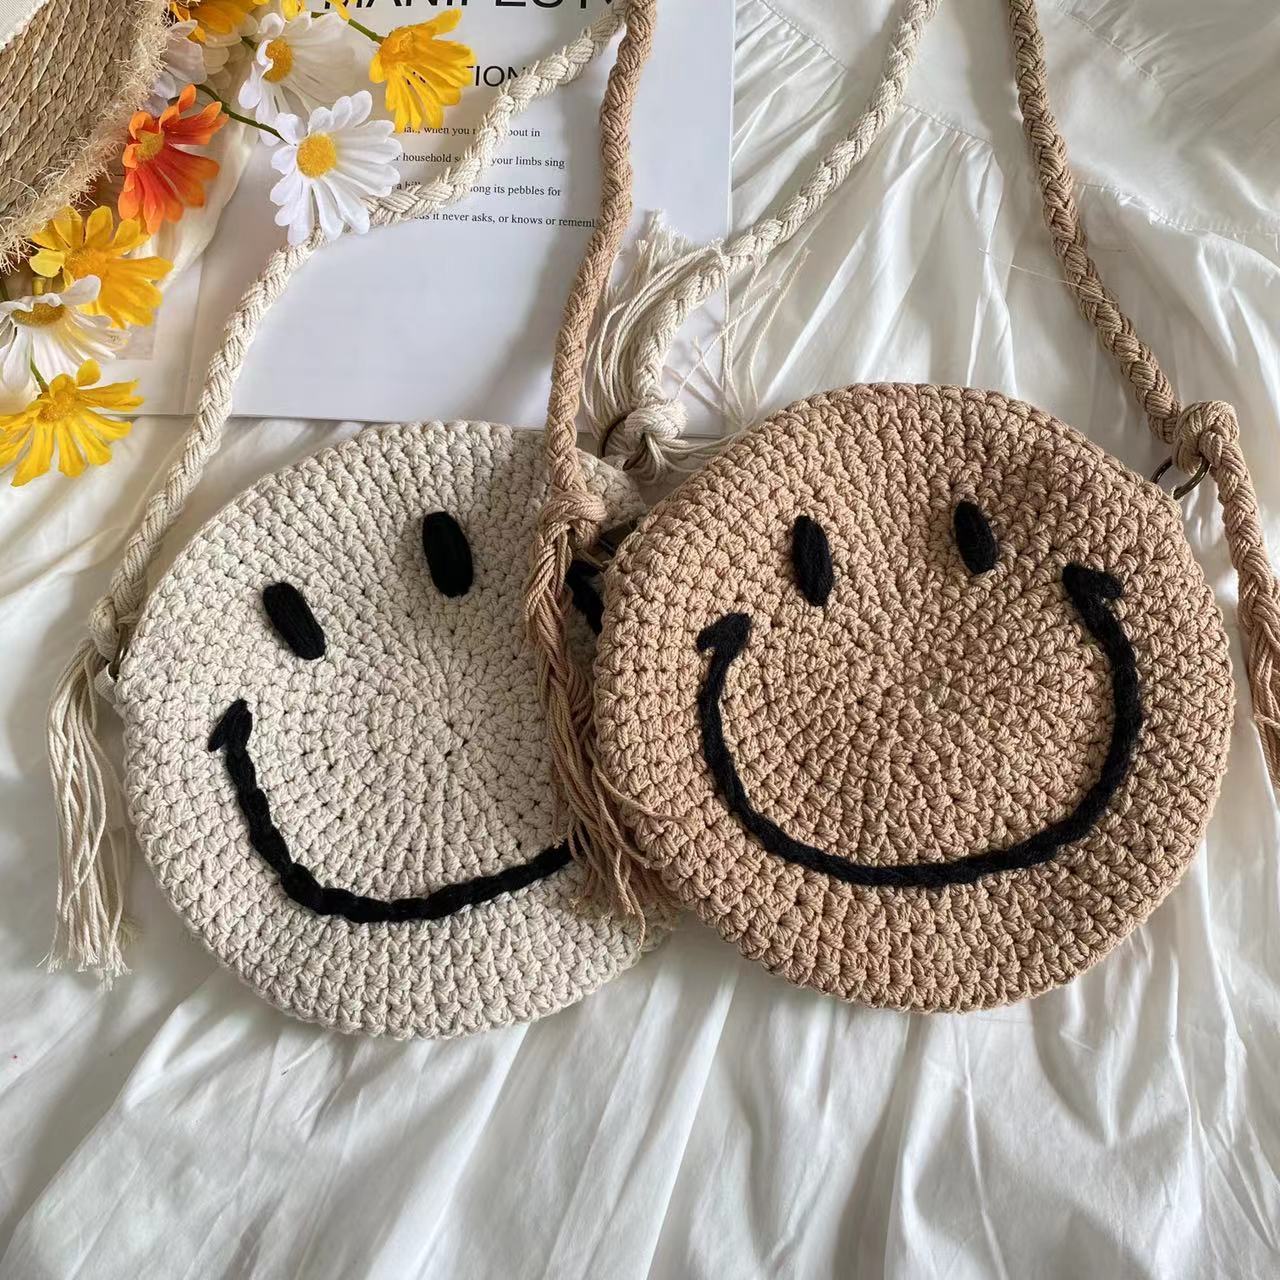 Smiley Pouch Large | Makeup Bag | Travel Essentials | Gift Ideas